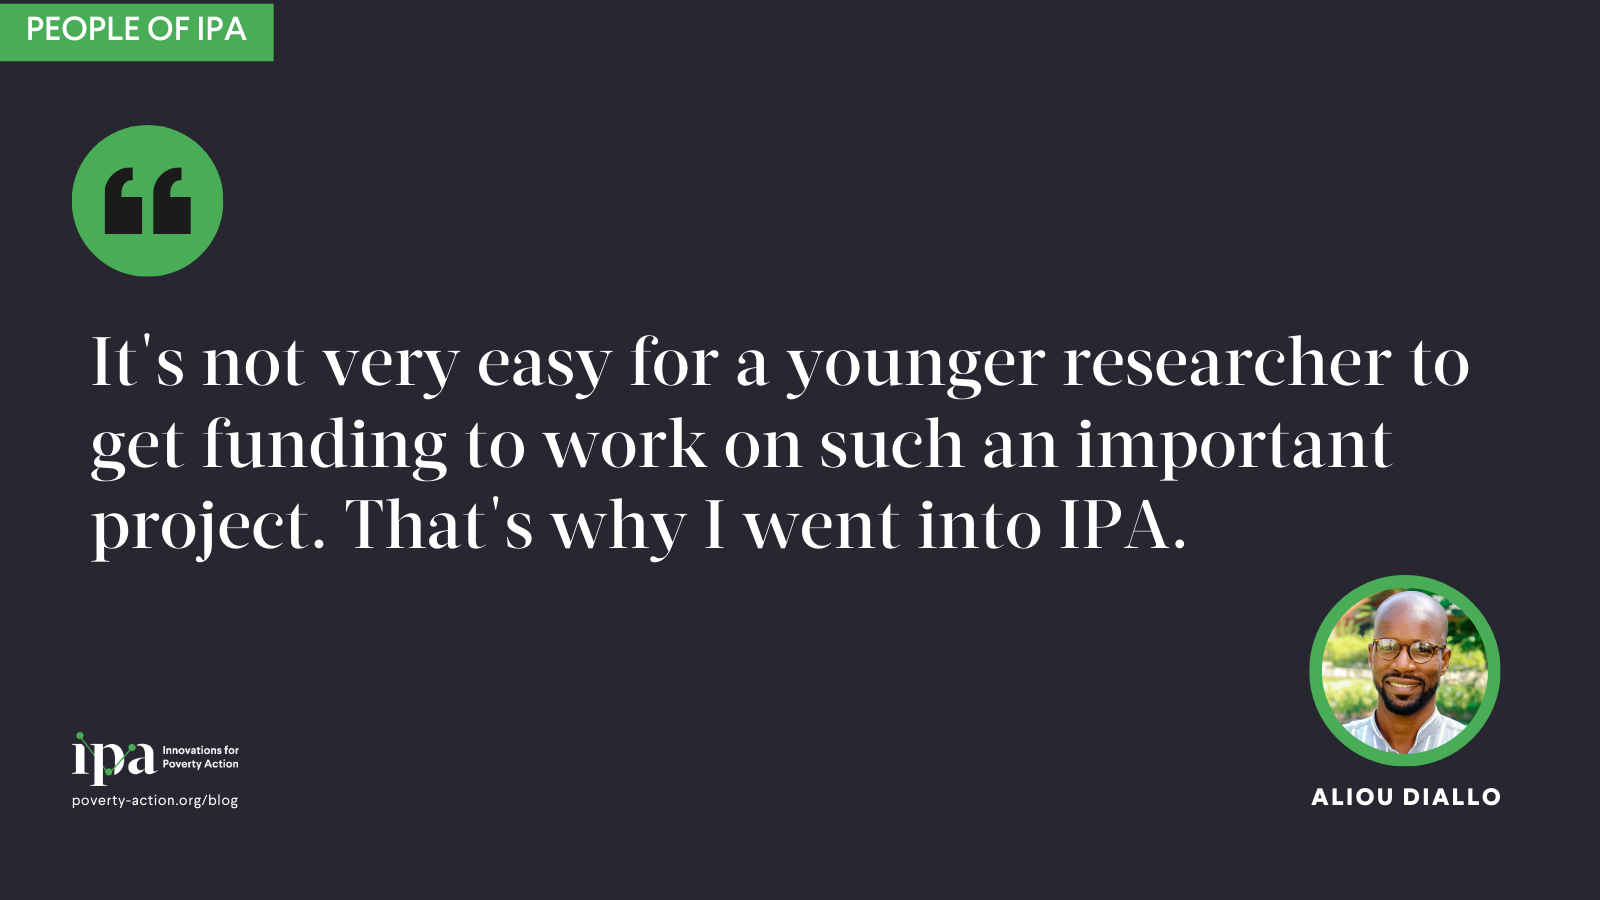 It's not very easy for a younger researcher to get funding to work on such an important project. That's why I went into IPA.